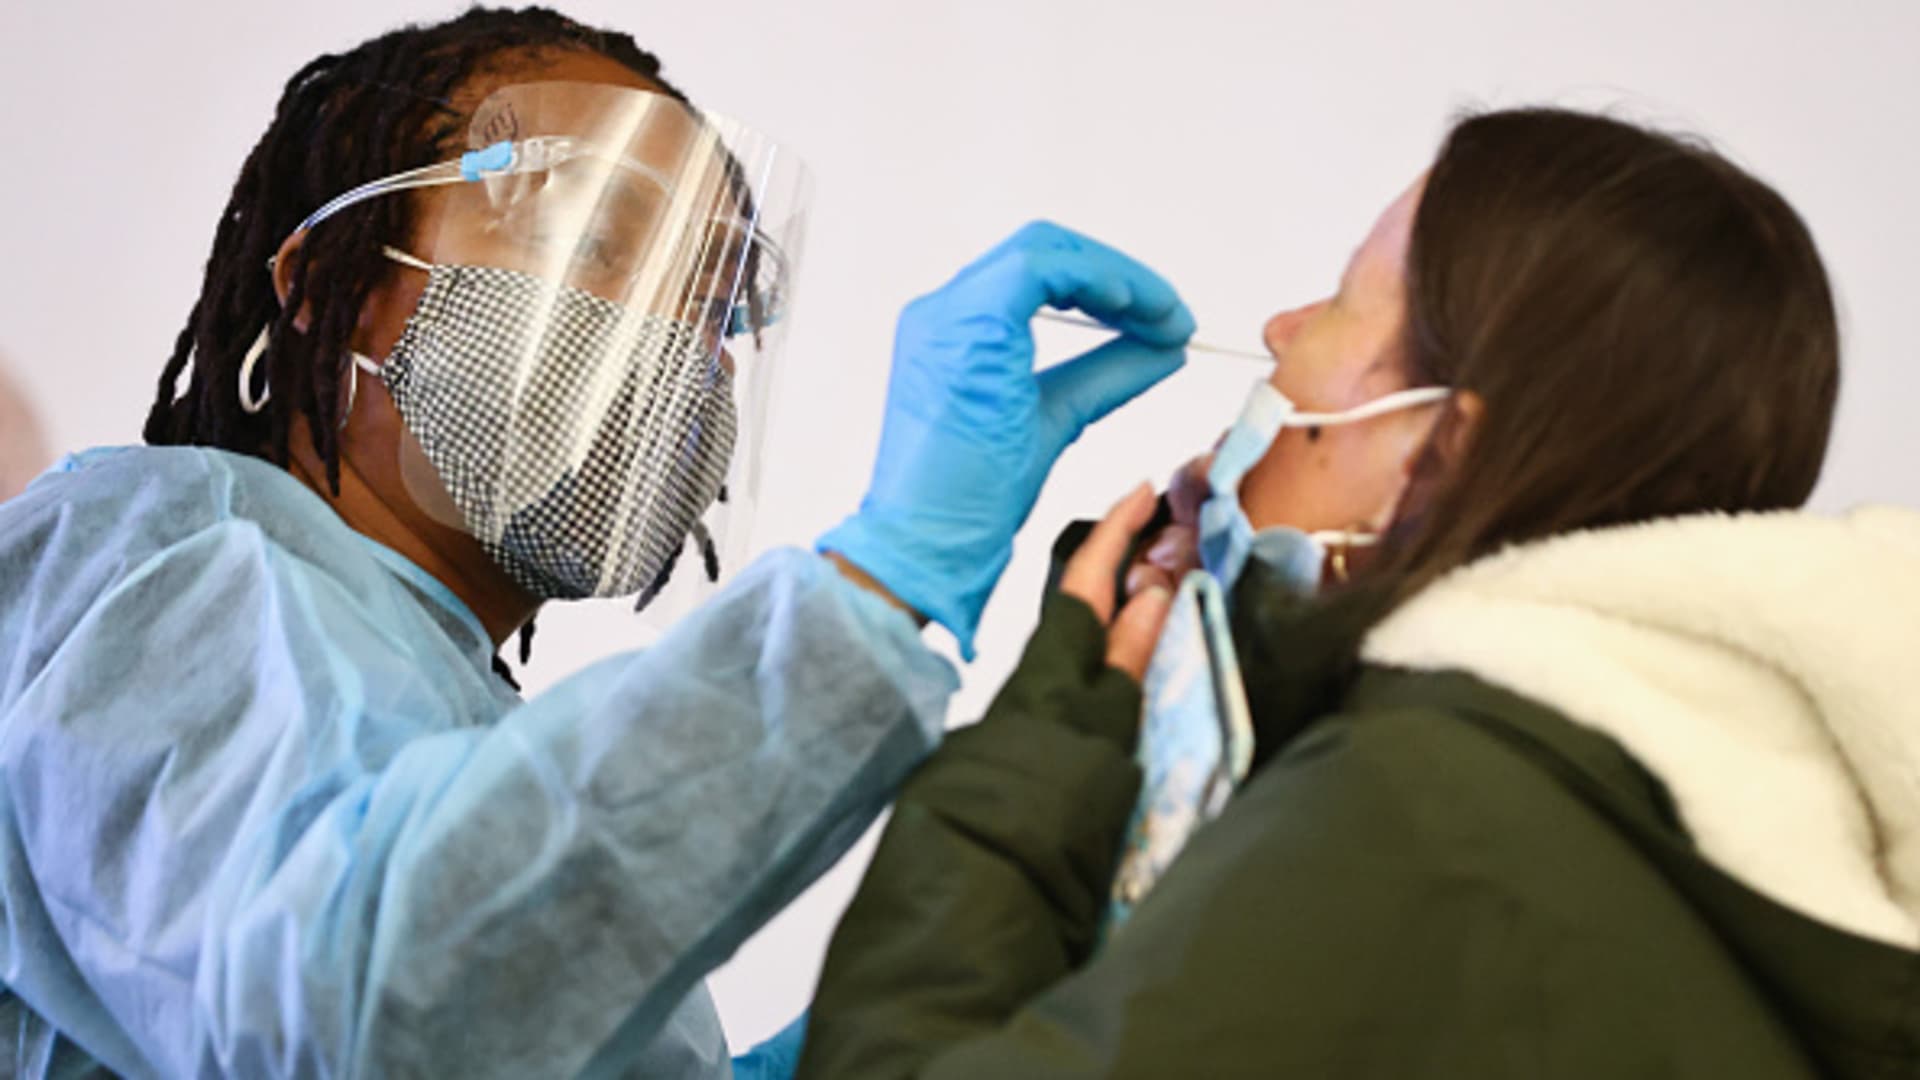 Merline Jimenez (L) administers a COVID-19 nasopharyngeal swab to a person at a testing site located in the international terminal at Los Angeles International Airport (LAX) amid a surge in omicron variant cases on December 21, 2021 in Los Angeles, California.